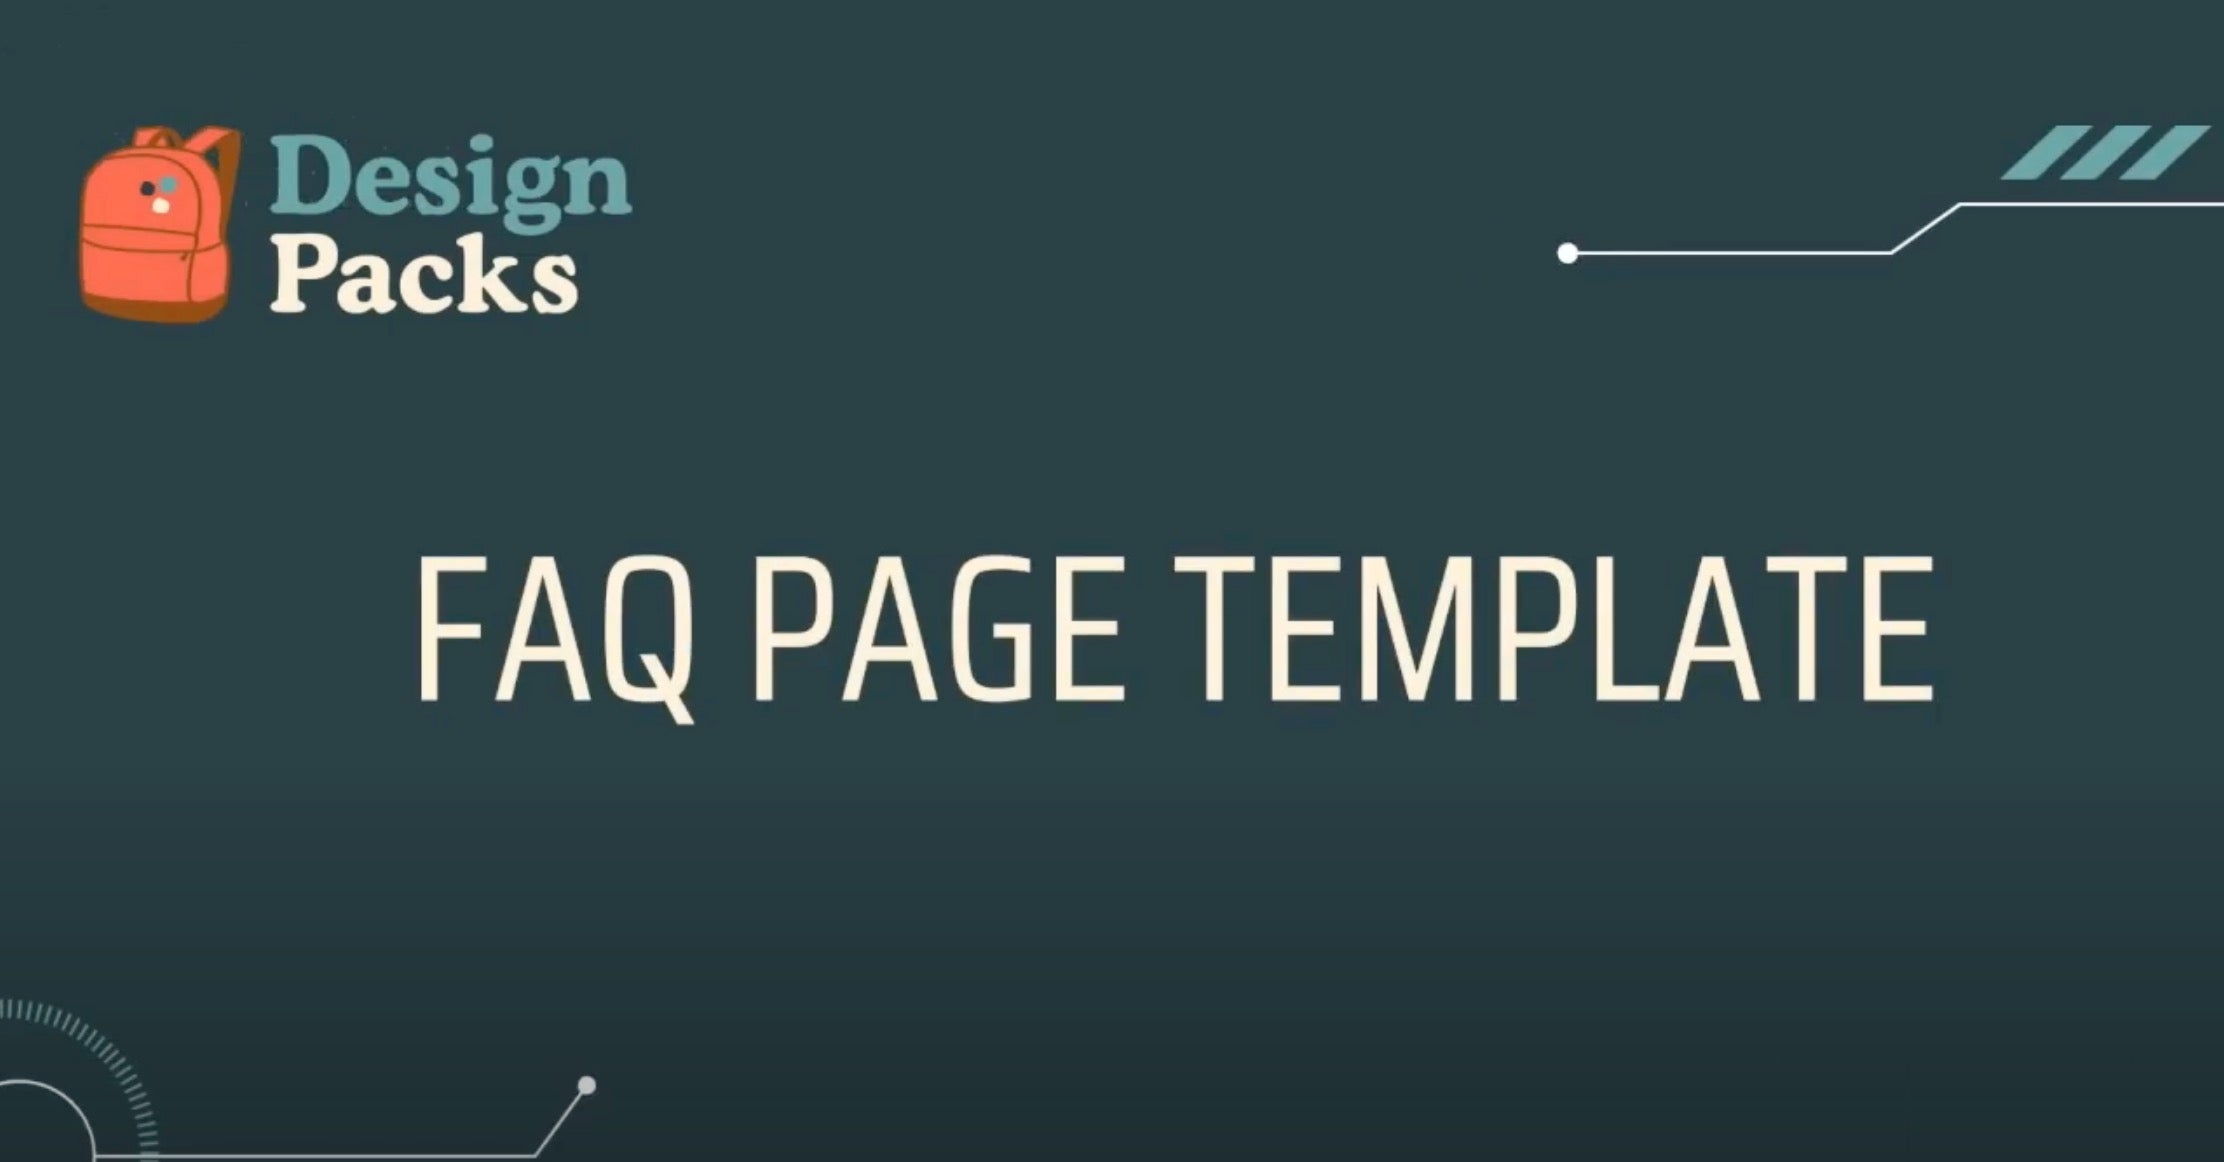 How to add a page template